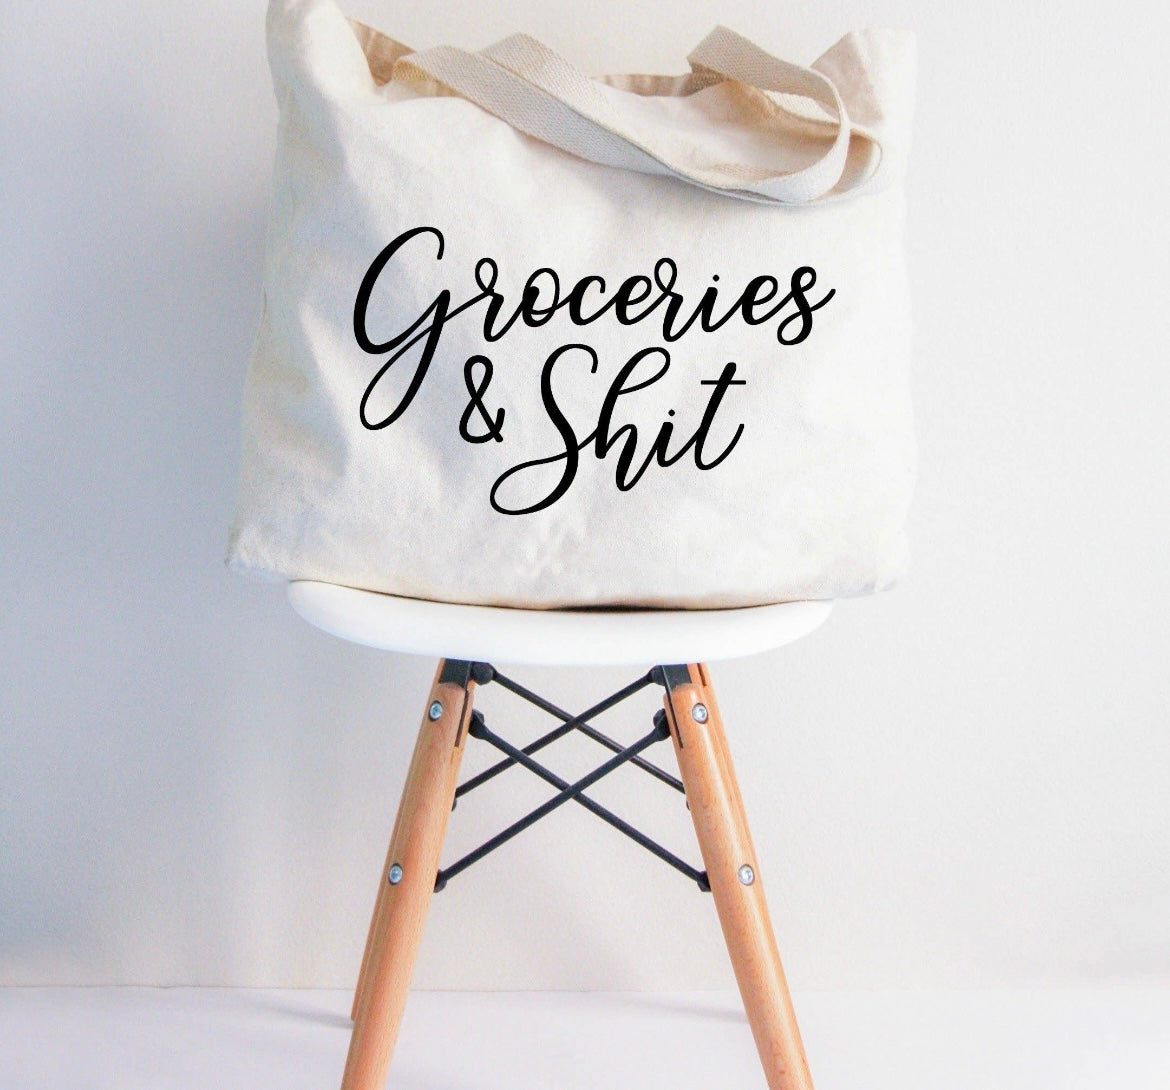 Groceries & Shit - Reusable Tote